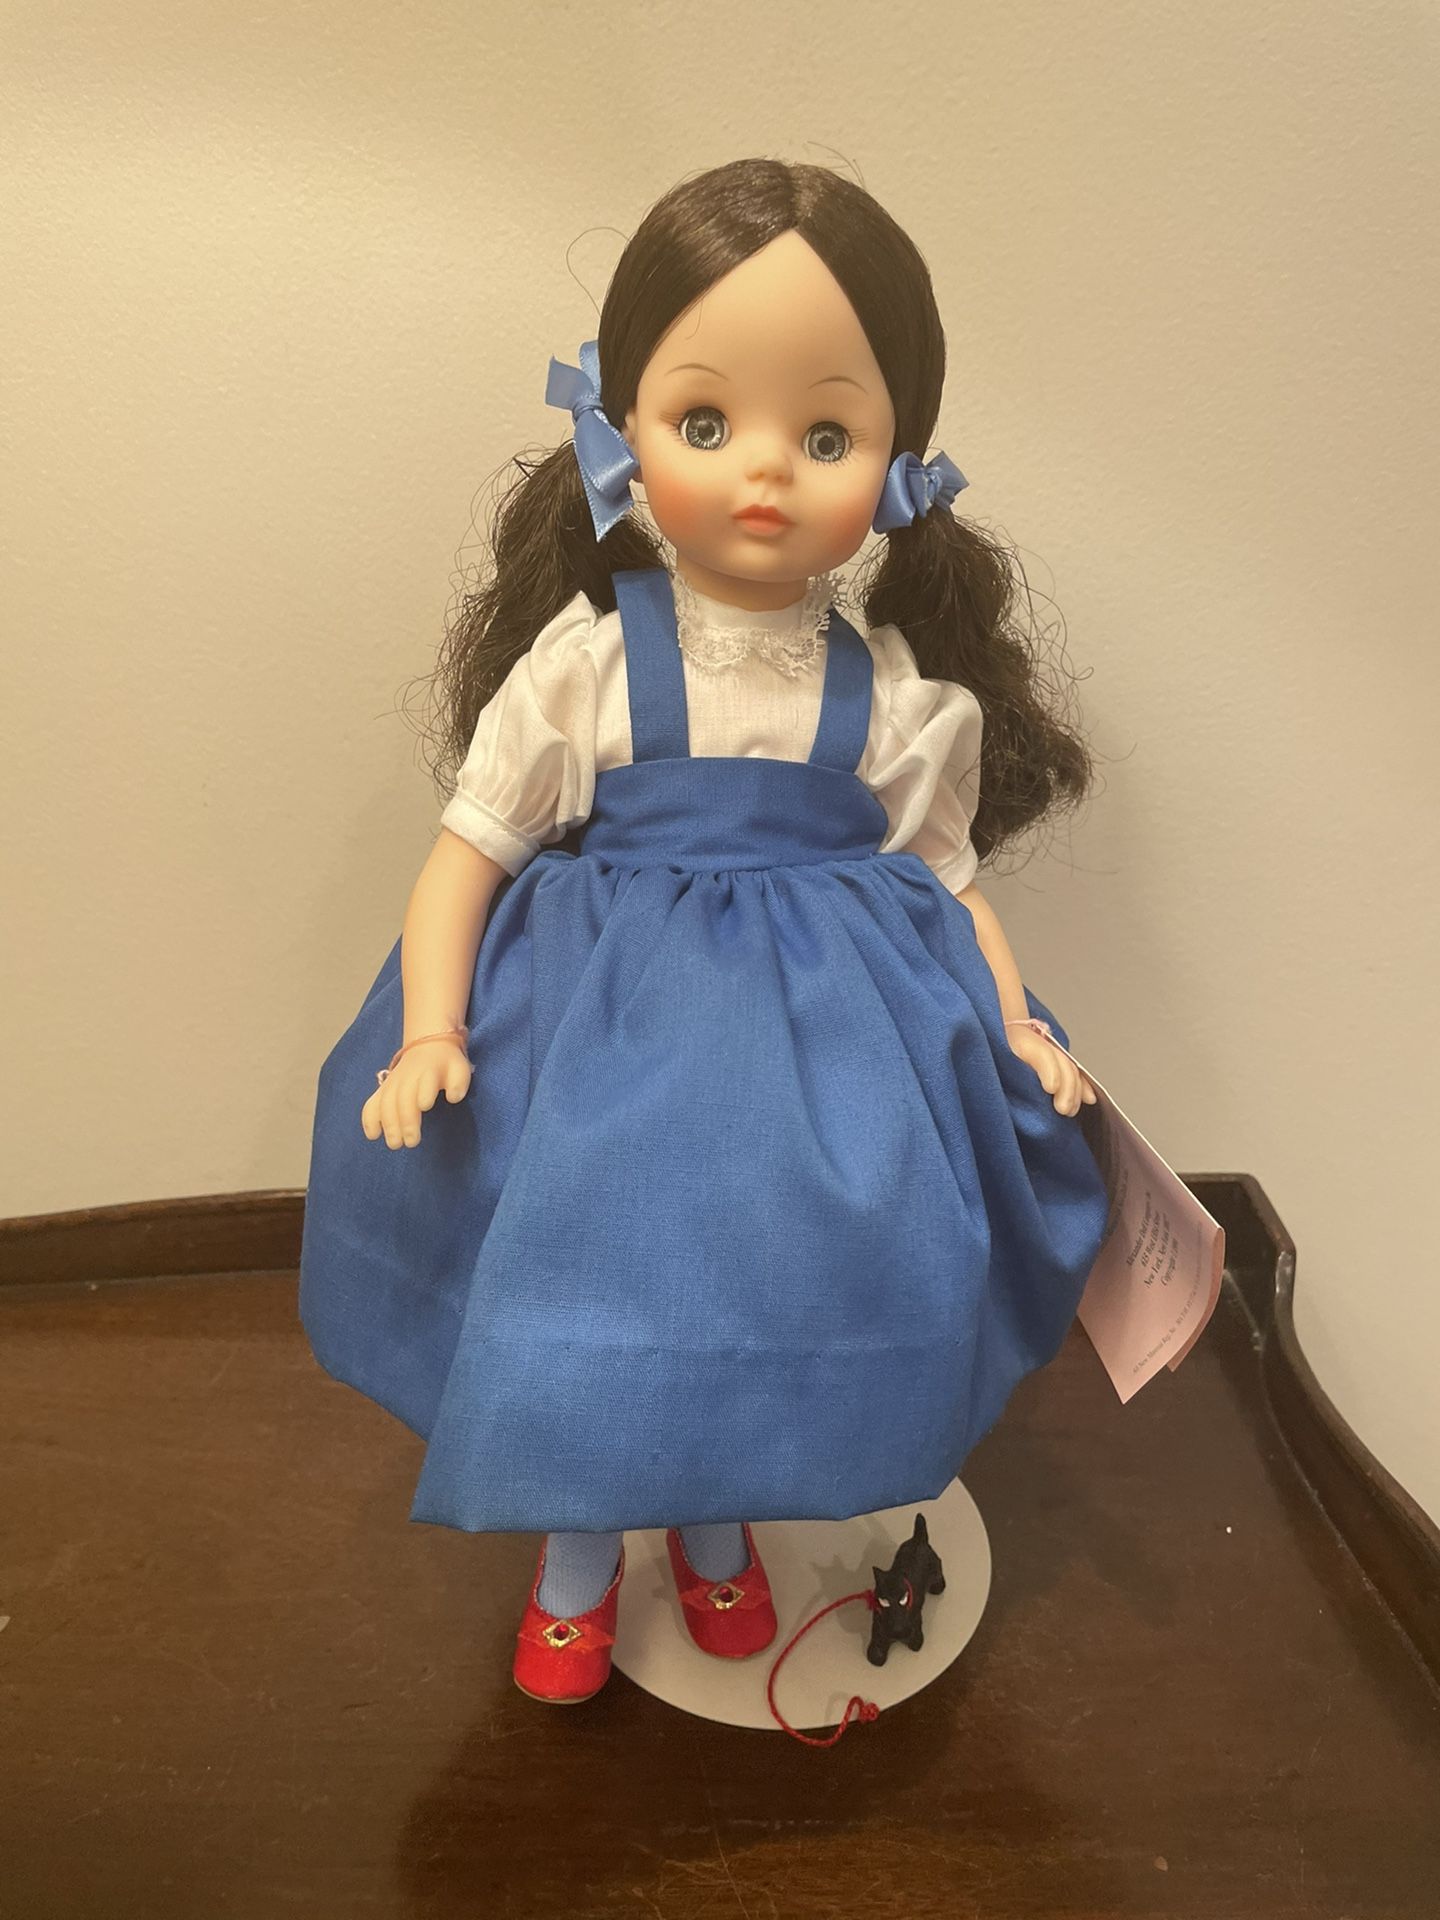 Wizard of Oz Madame Alexander Vintage 1990 Dorthy Doll 14” RARE! Condition is pre owned and shows some signs of wear from age but overall  is in solid